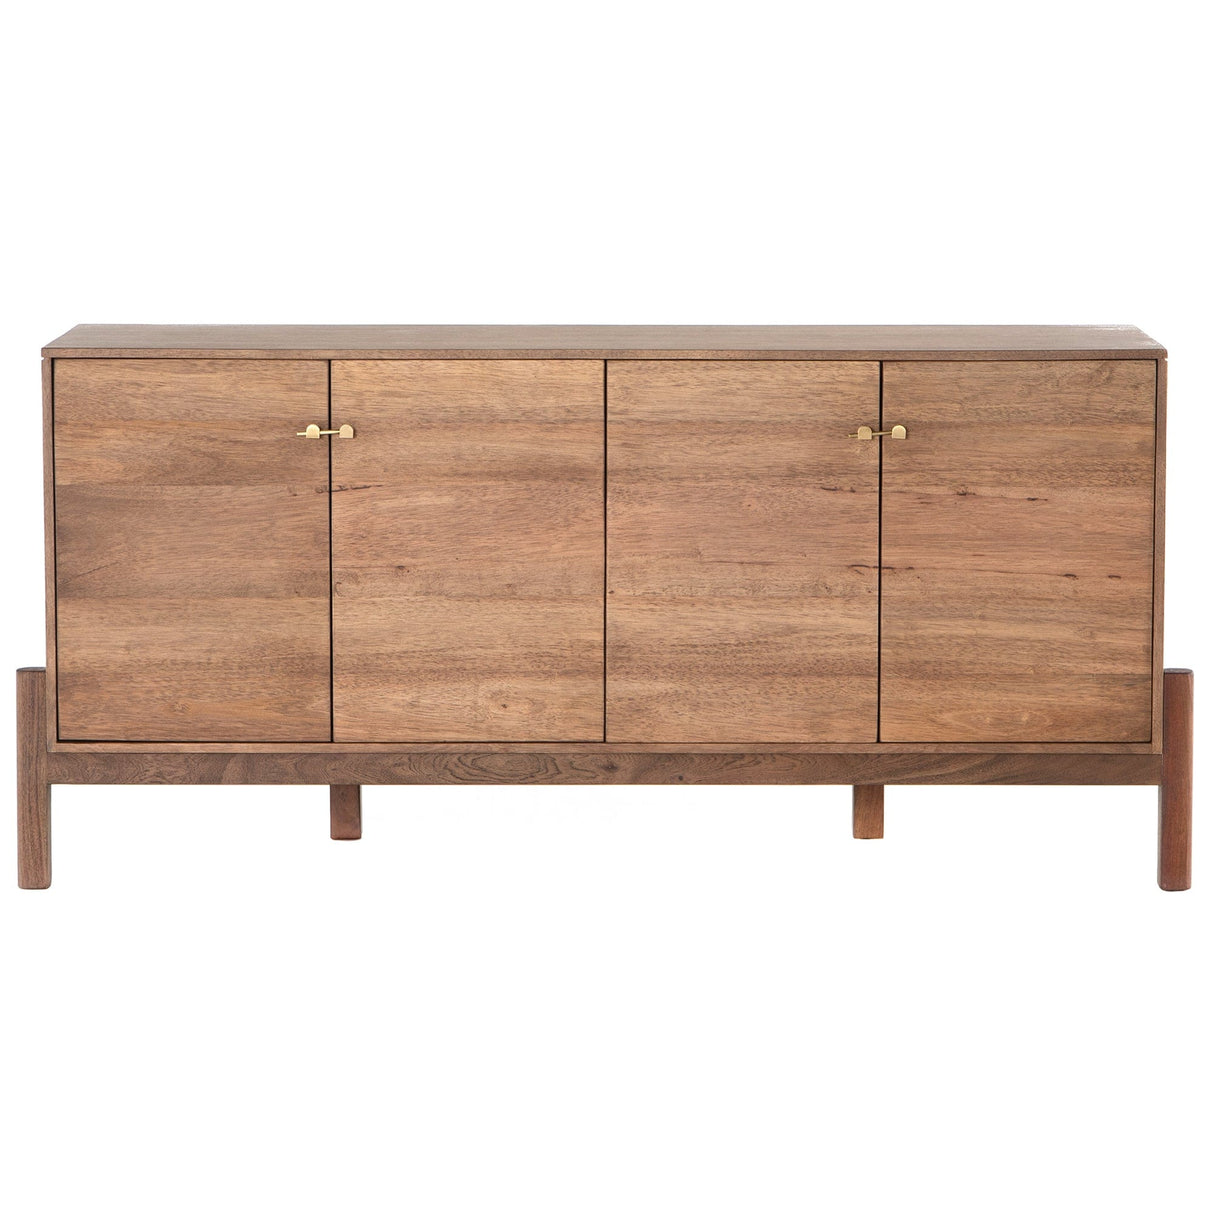 Four Hands Reza Sideboard Furniture four-hands-109029-001 801542577292